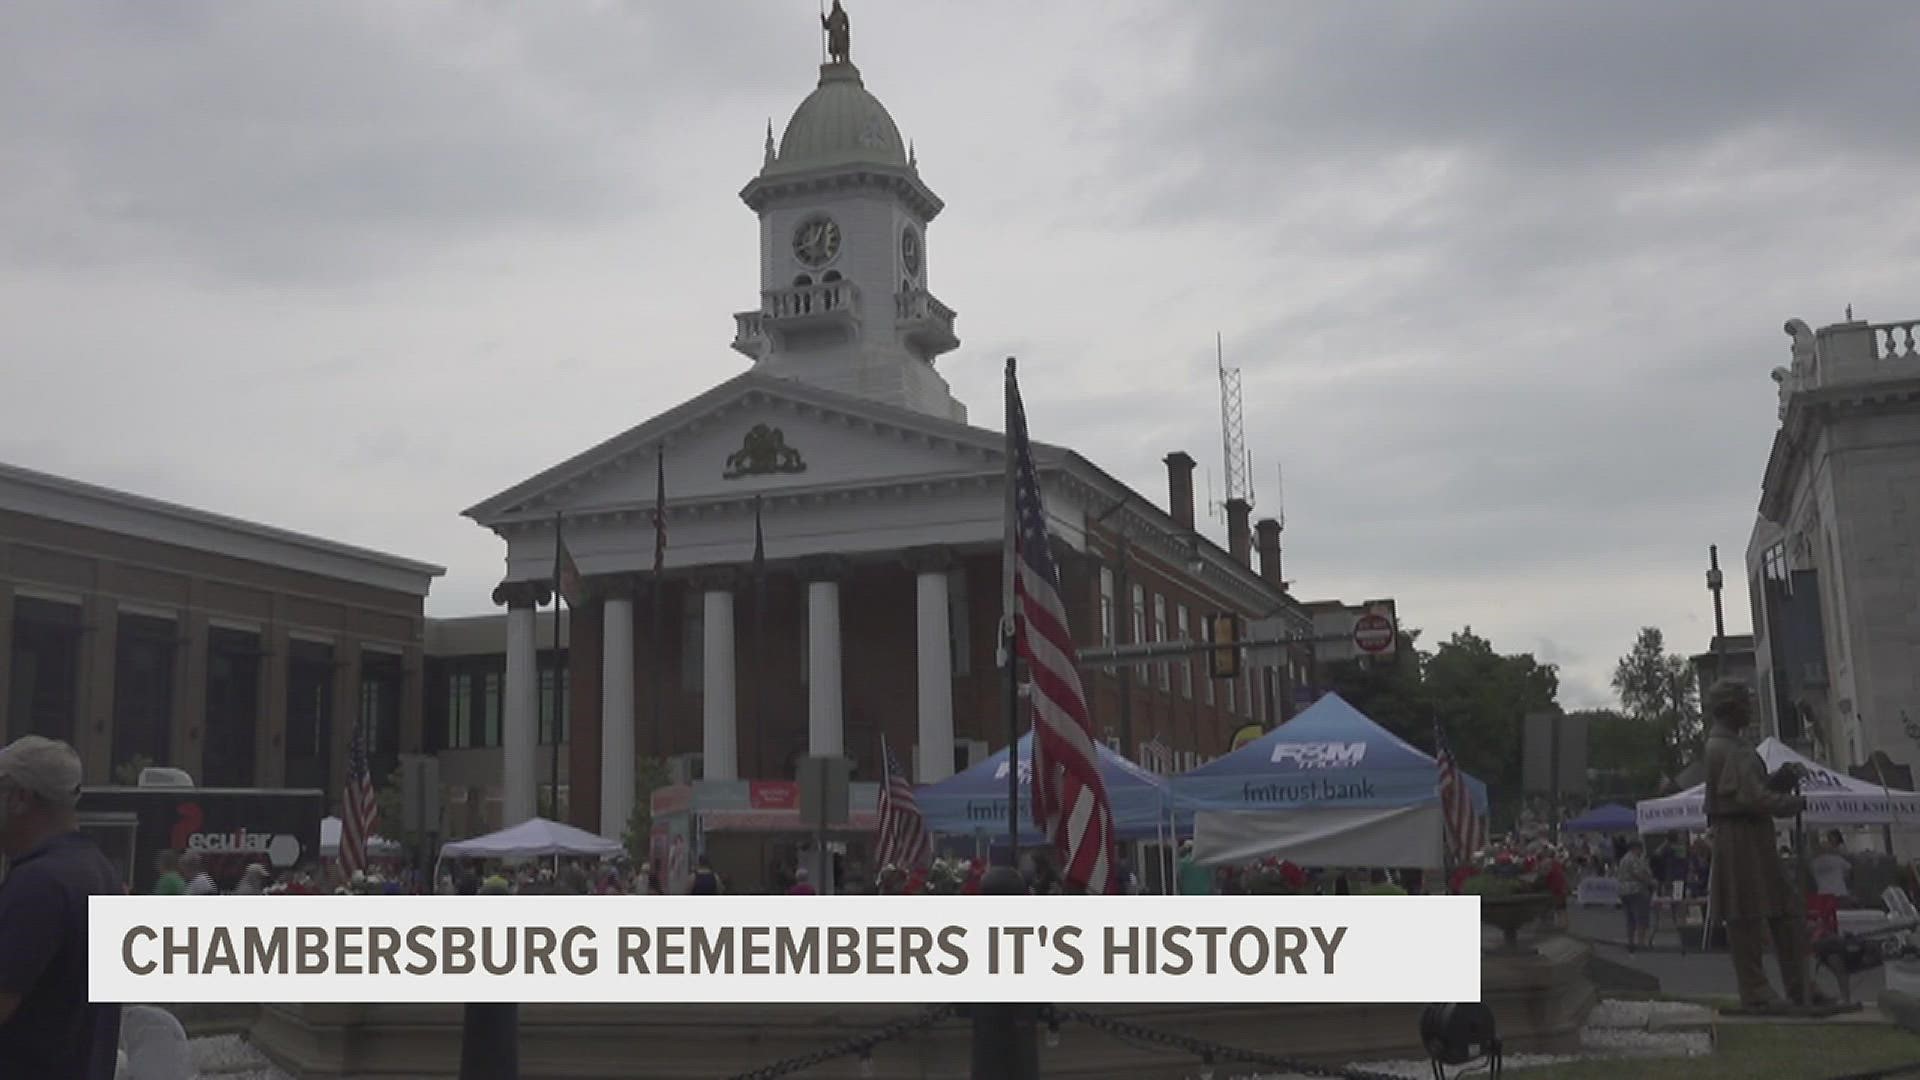 From scrubbing soldiers gravestones, to fake burning down their town, Chambersburg celebrates its illustrious past.